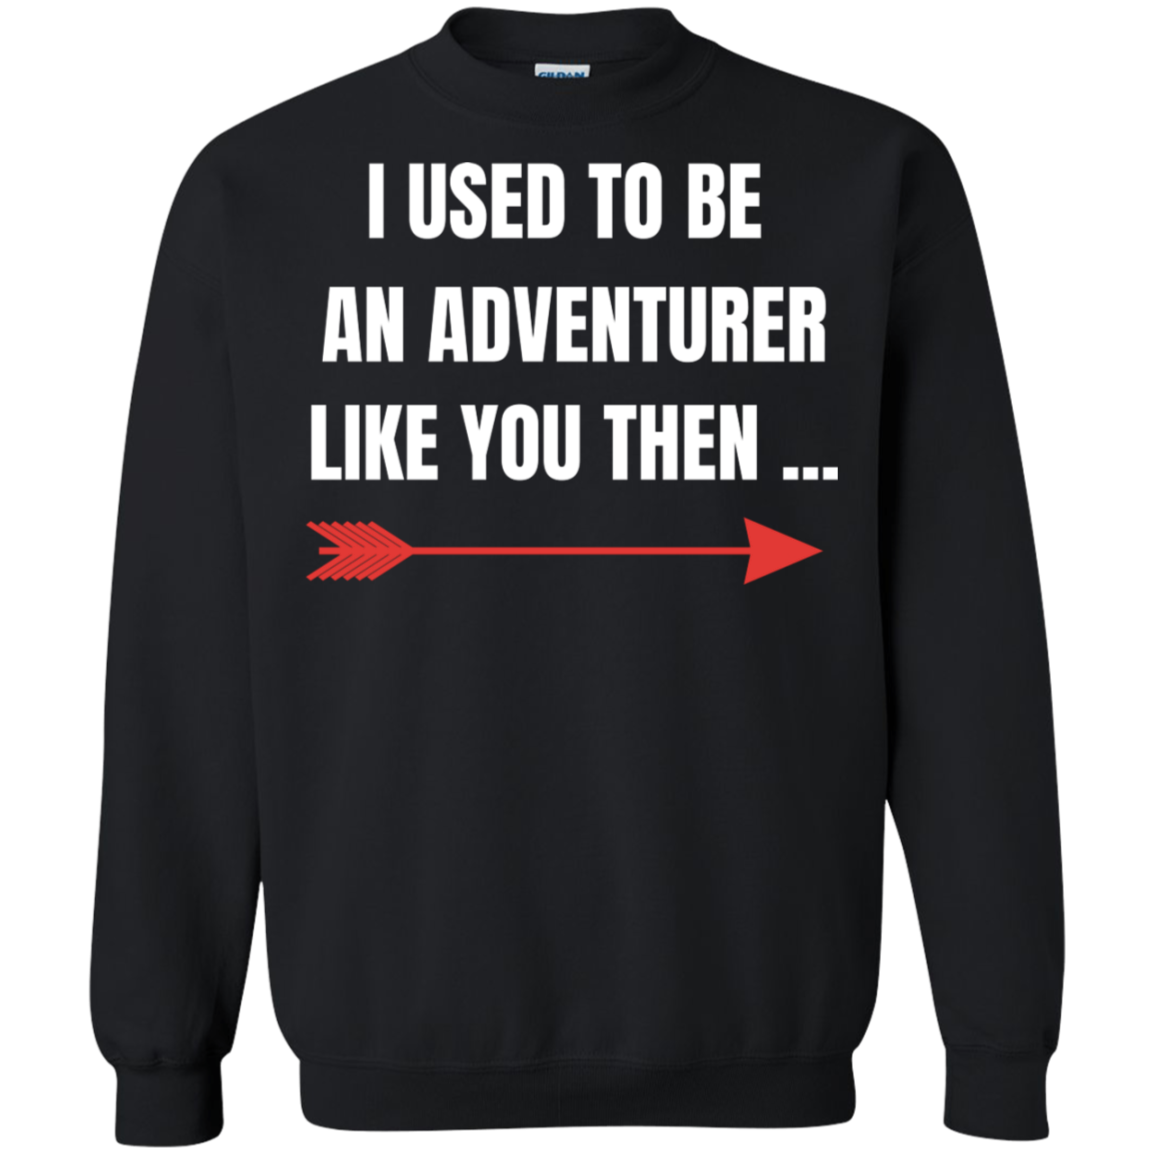 I Used To Be An Adventurer Like You Then... Fantasy RPG Video Gamer Crewneck Pullover Sweatshirt  8 oz.